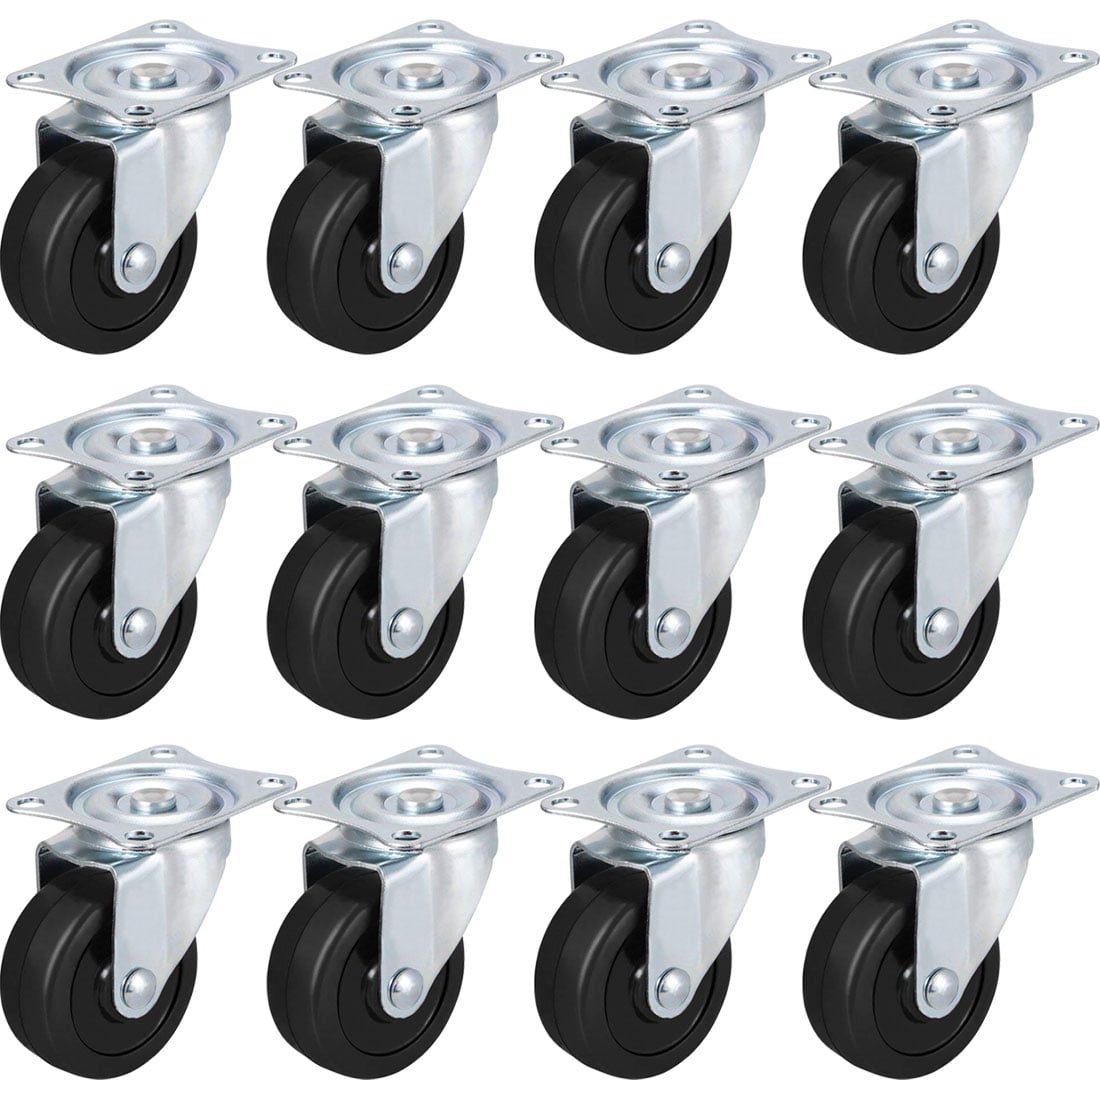 12 Pack 2" Swivel Caster Wheels Rubber Base With Top Plate & Bearing Heavy Duty 